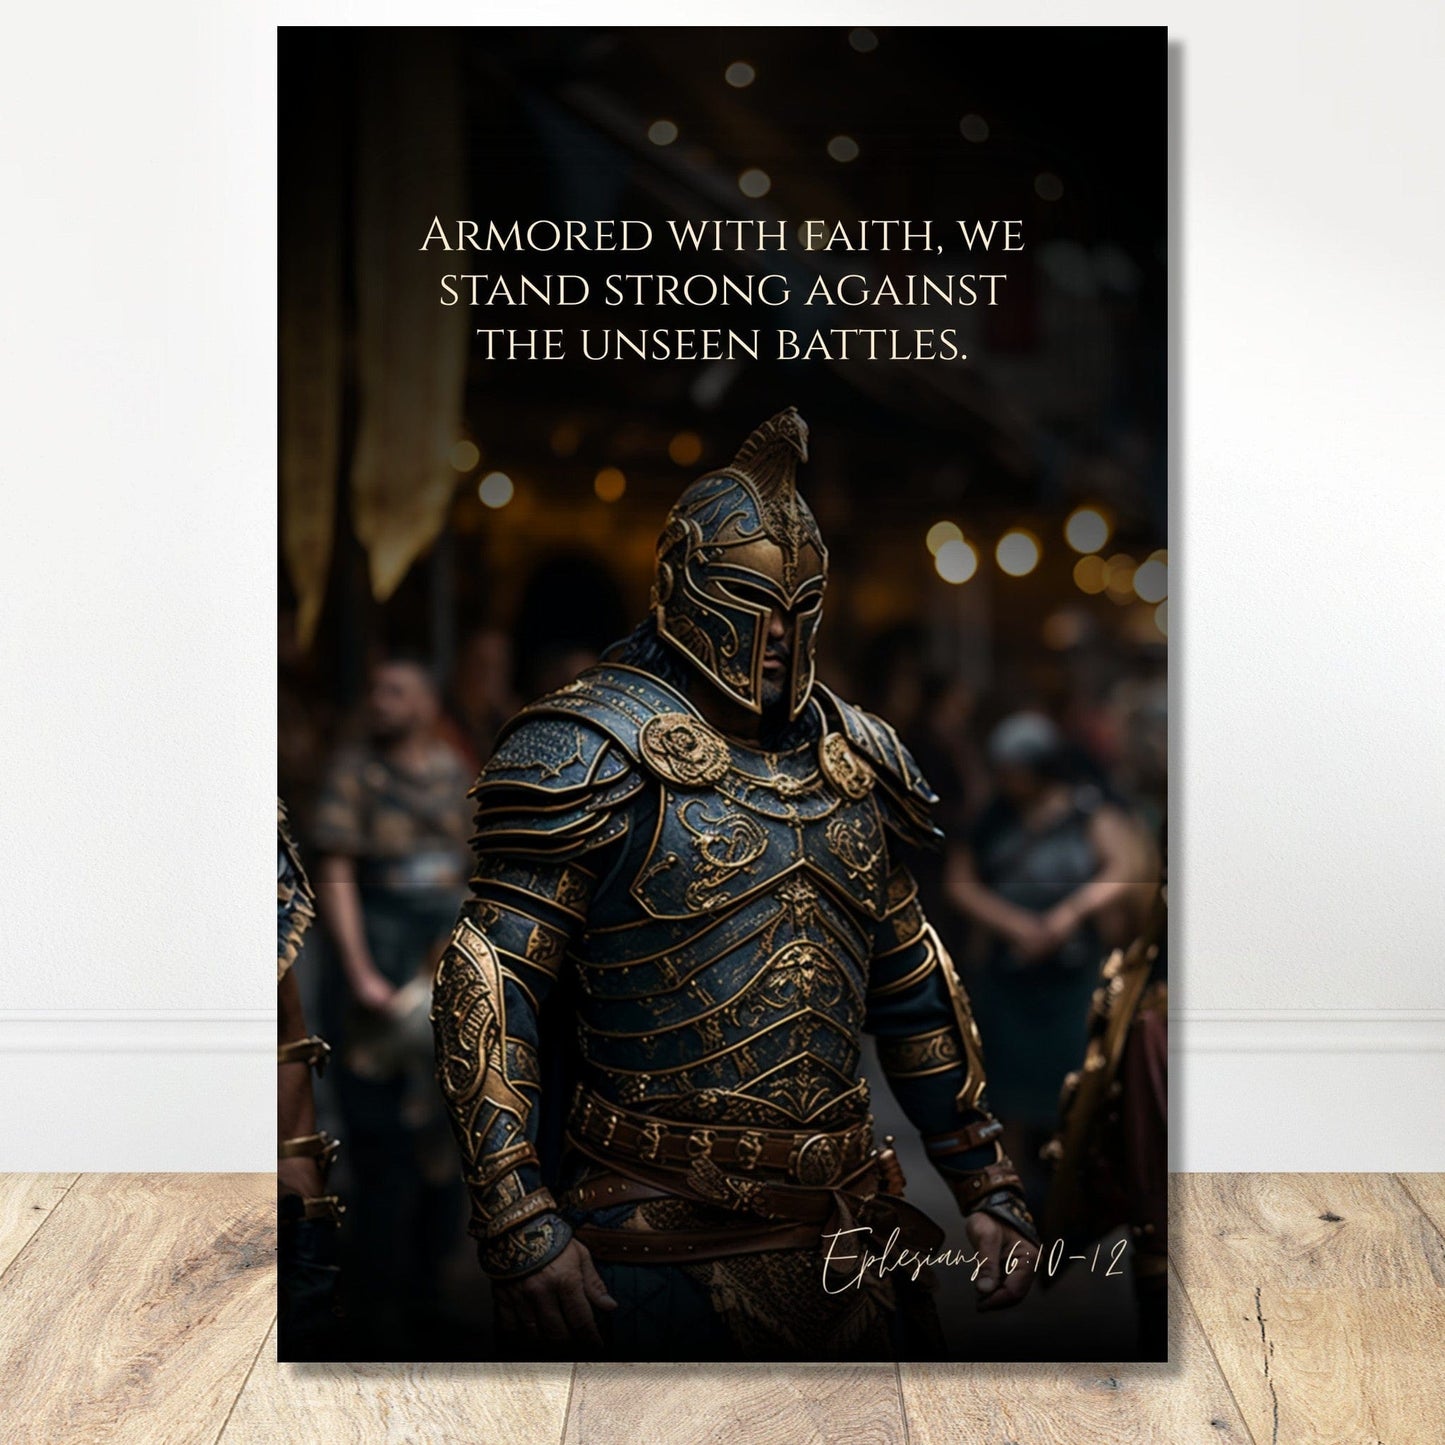 Coffee With My Father Print Material 60x90 cm / 24x36″ / Premium Matte Paper Poster / - The Unseen Battles: Ephesians 6:10-12 - Artwork